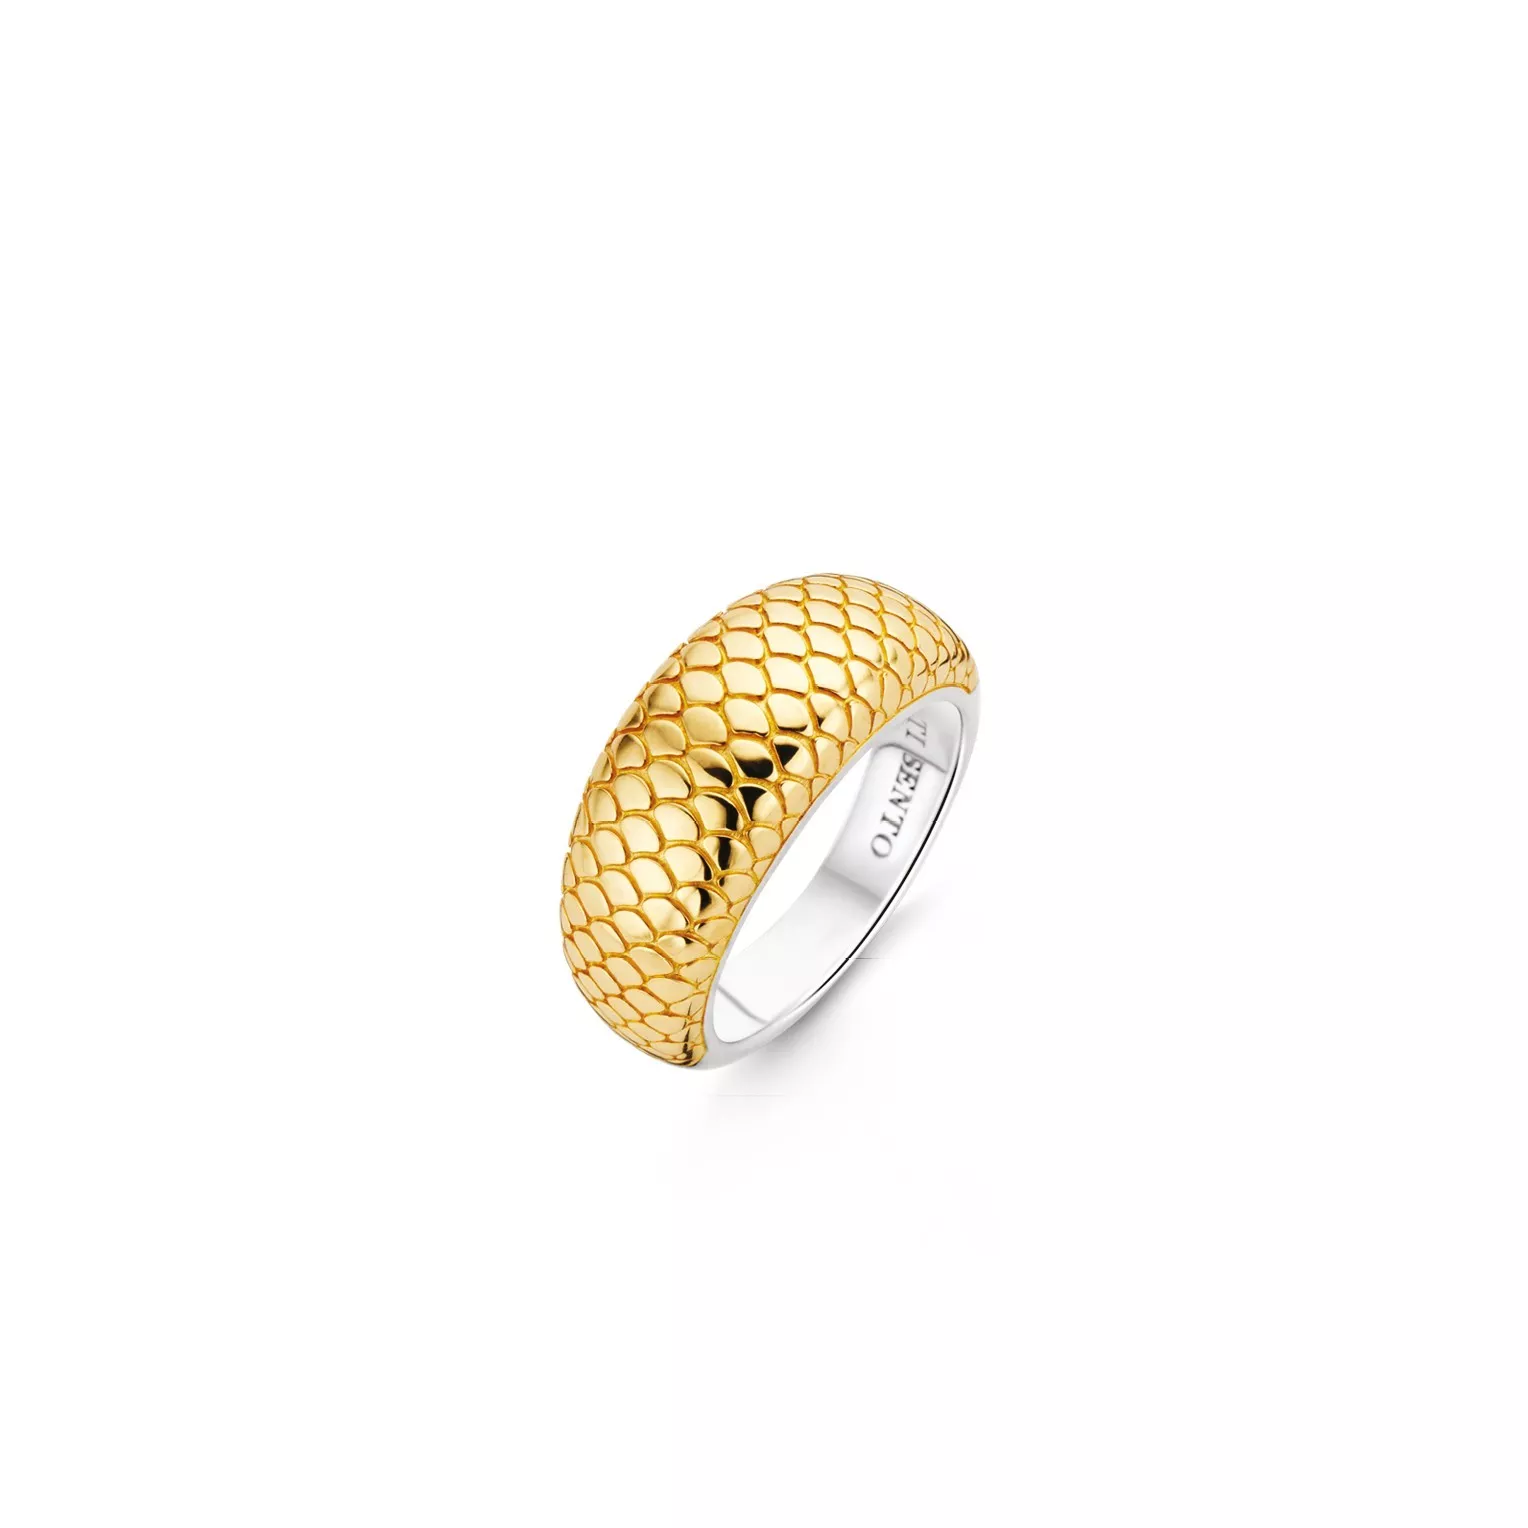 TI SENTO - Milano Ring 12162SY Zilver gold plated Maat 48